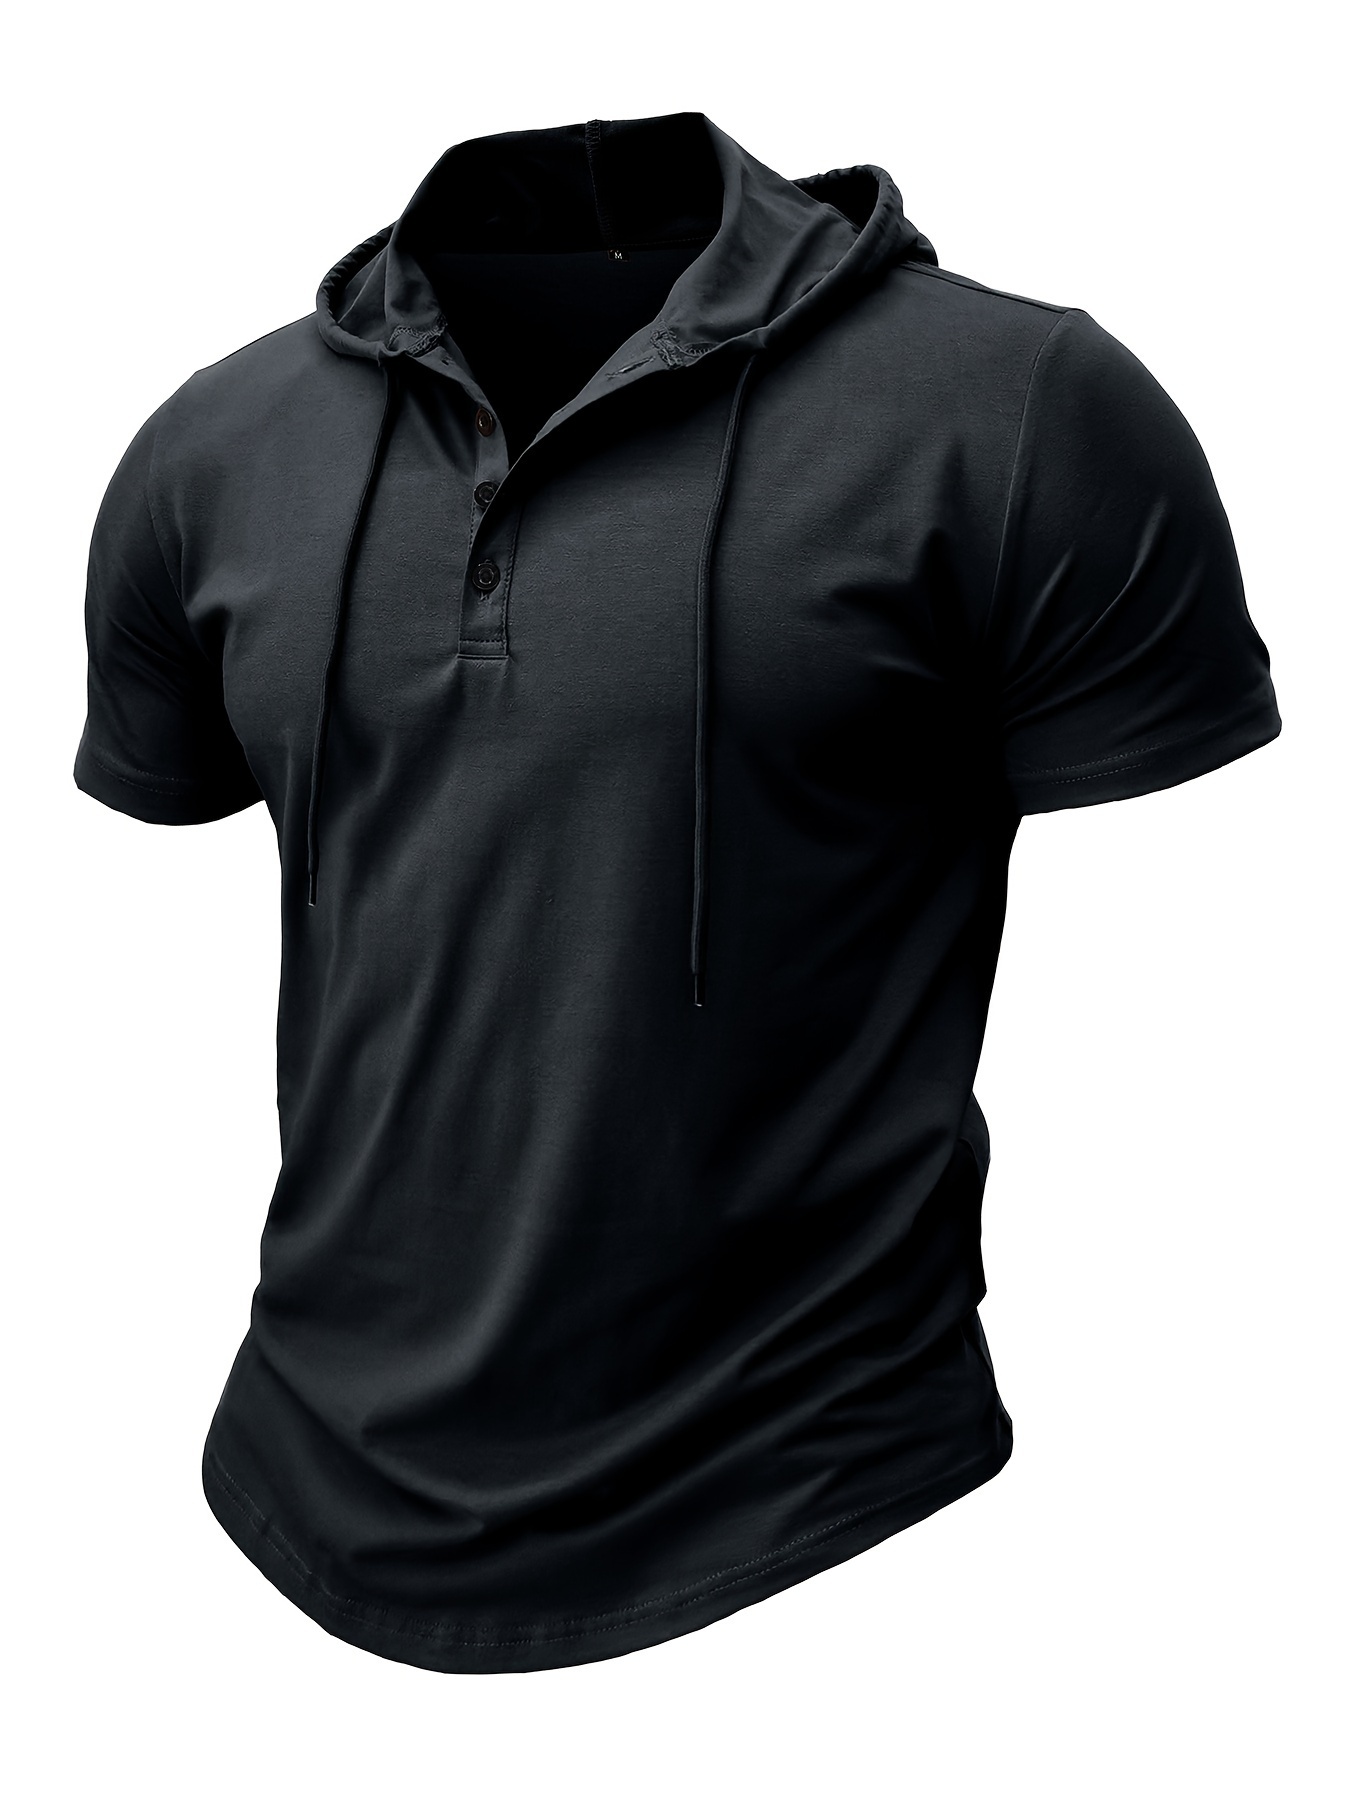 mens solid drawstring hooded short sleeve sports t shirt mens cotton blend henley top for summer outdoor details 11